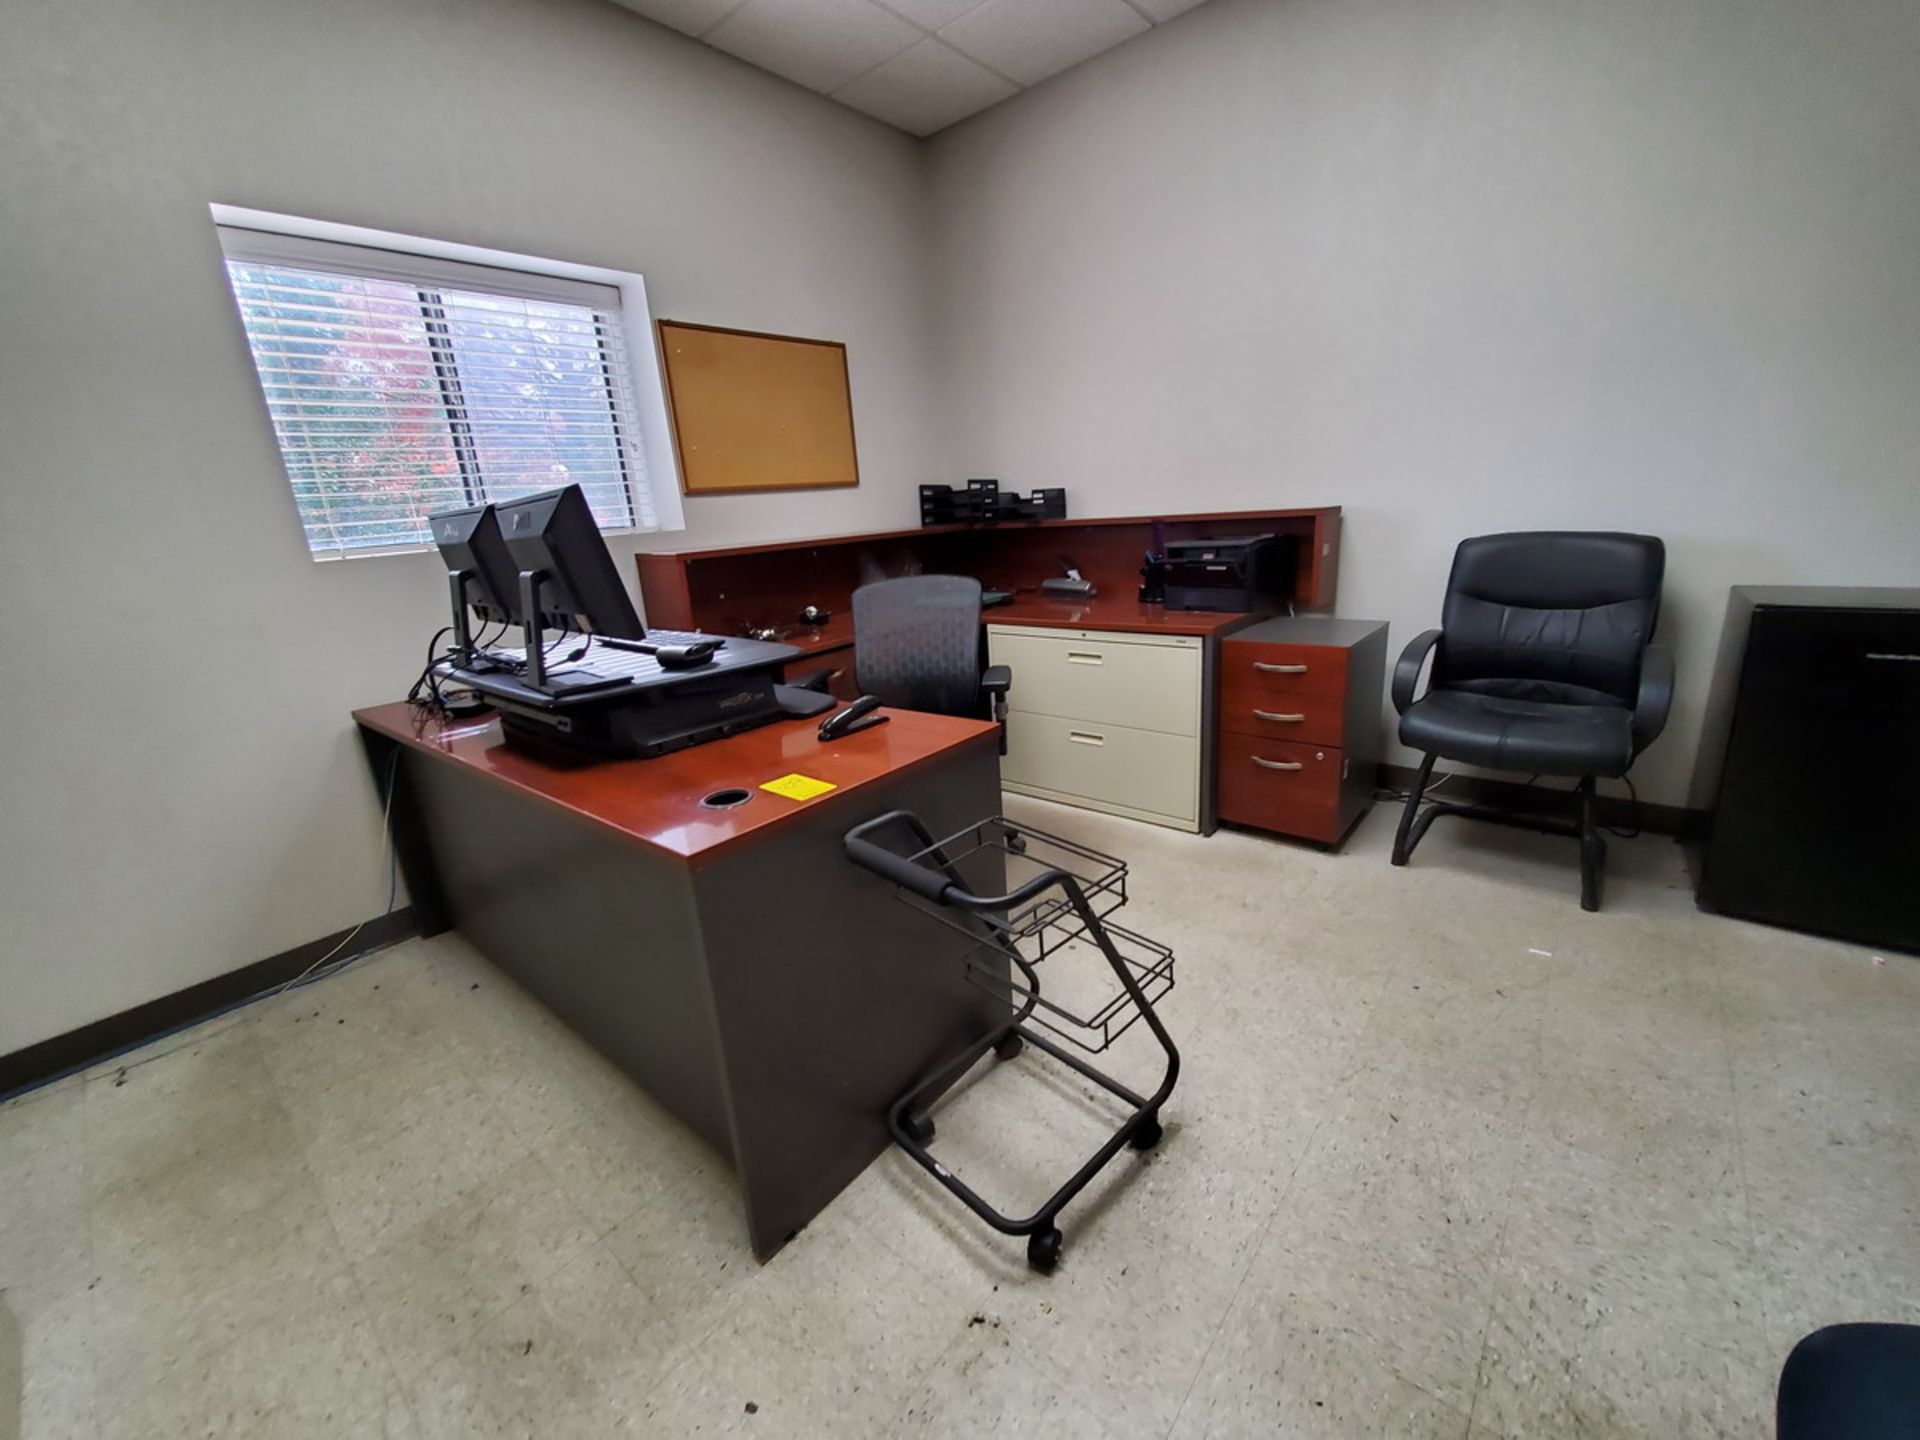 Office Contents To Include But Not Limited To: 3Pc Desk, (2) Dell Monitors, Shredders, (3) File - Image 3 of 8